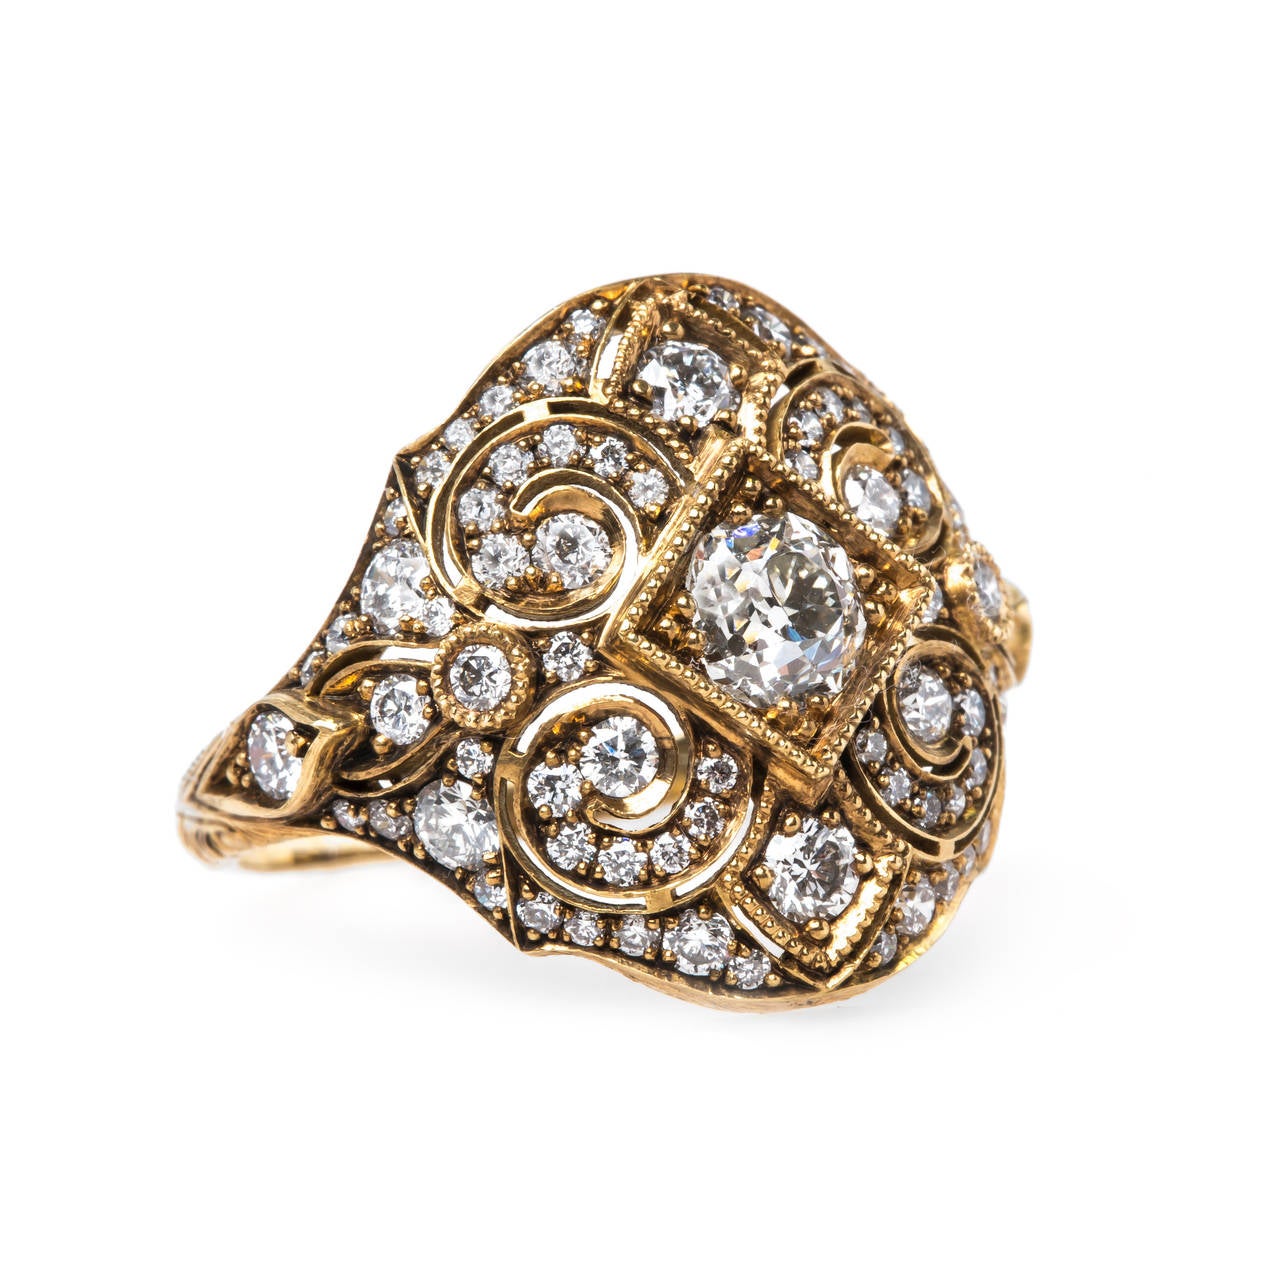 Bel Air is an extraordinary Trumpet & Horn Original ring that we are proud to offer in our vintage-inspired collection. The handmade 18k yellow gold bombe style ring centers a 0.49ct EGL certified Old Mine Cut diamond graded I color and VS2 clarity.